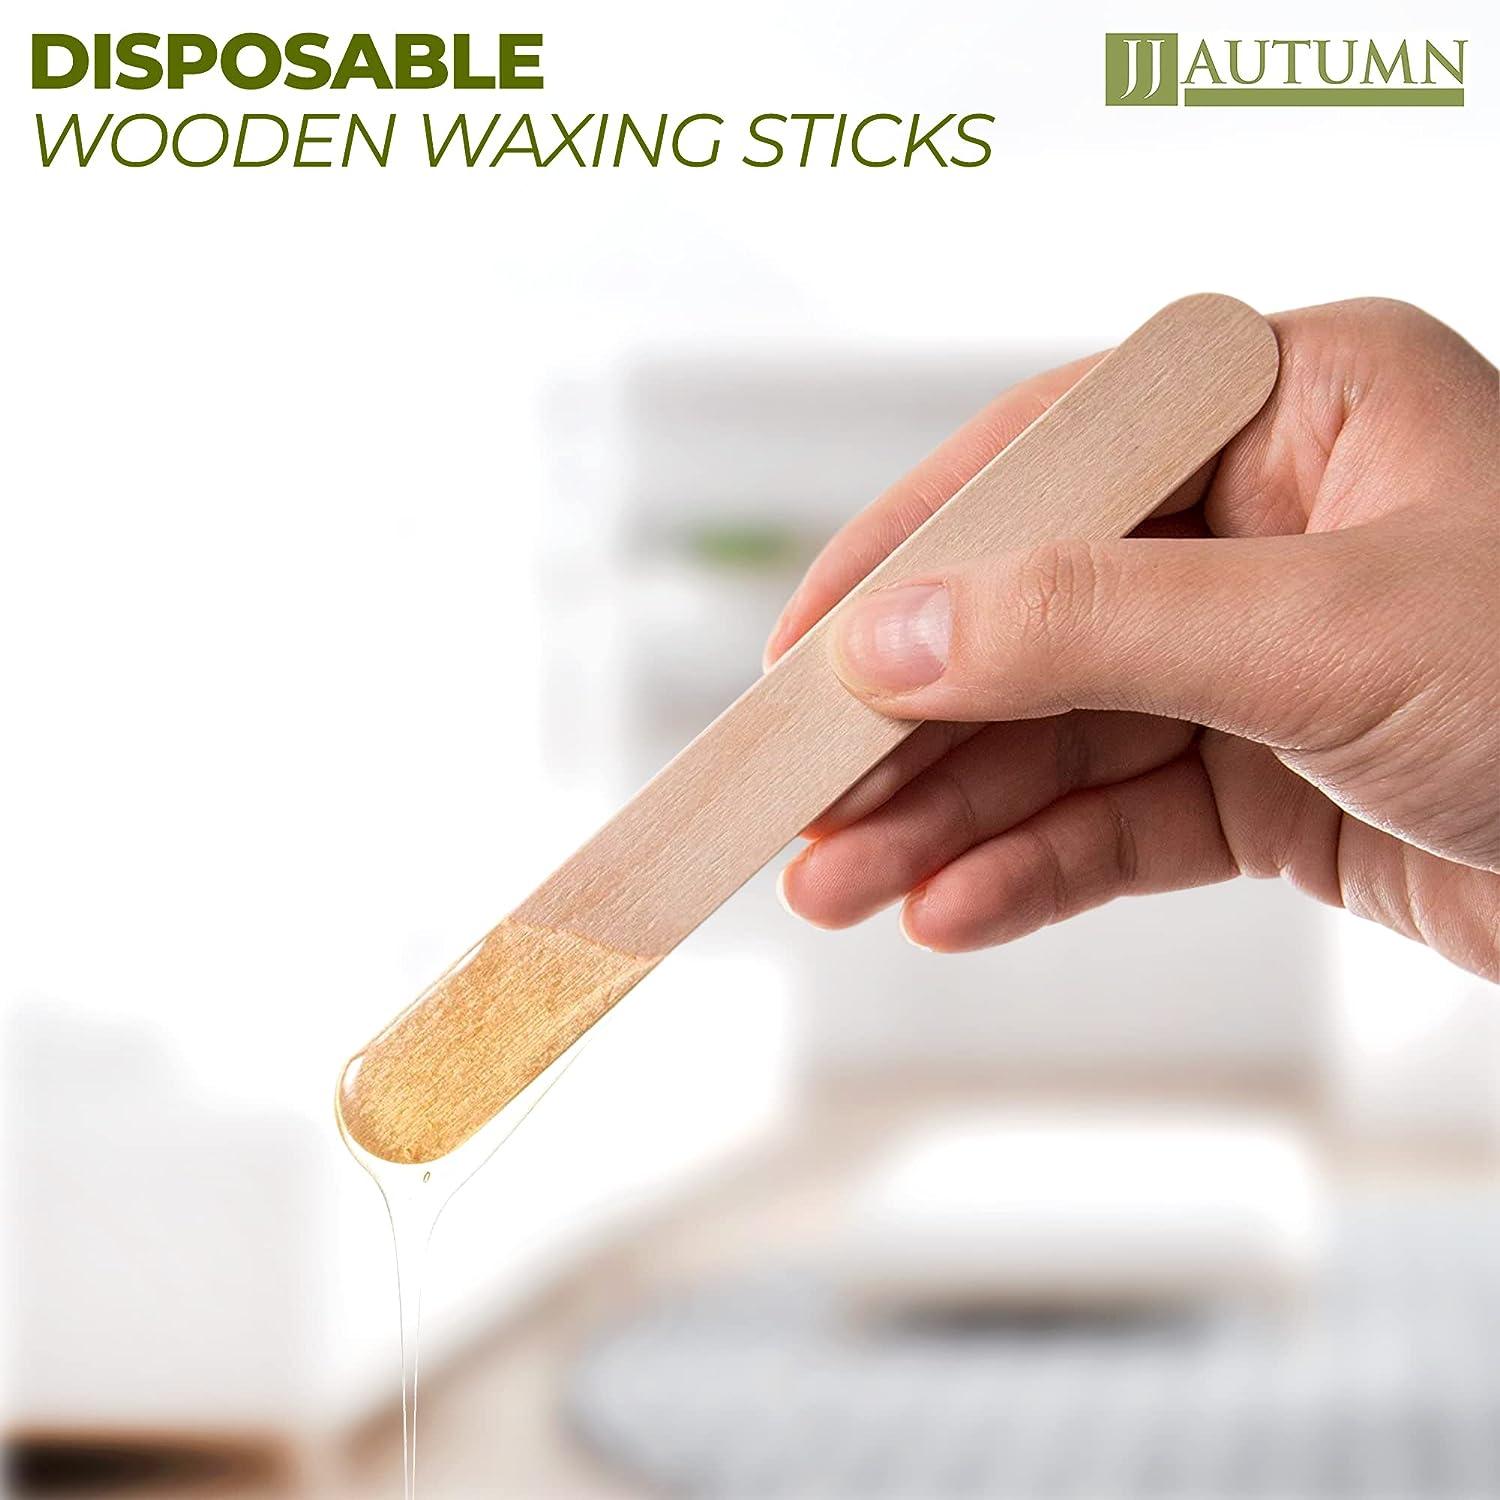 JJ Autumn Wooden Wax Sticks for Hair Removal, 100 Pcs Large Wood Popsicle  Sticks for Waxing and Ice Cream